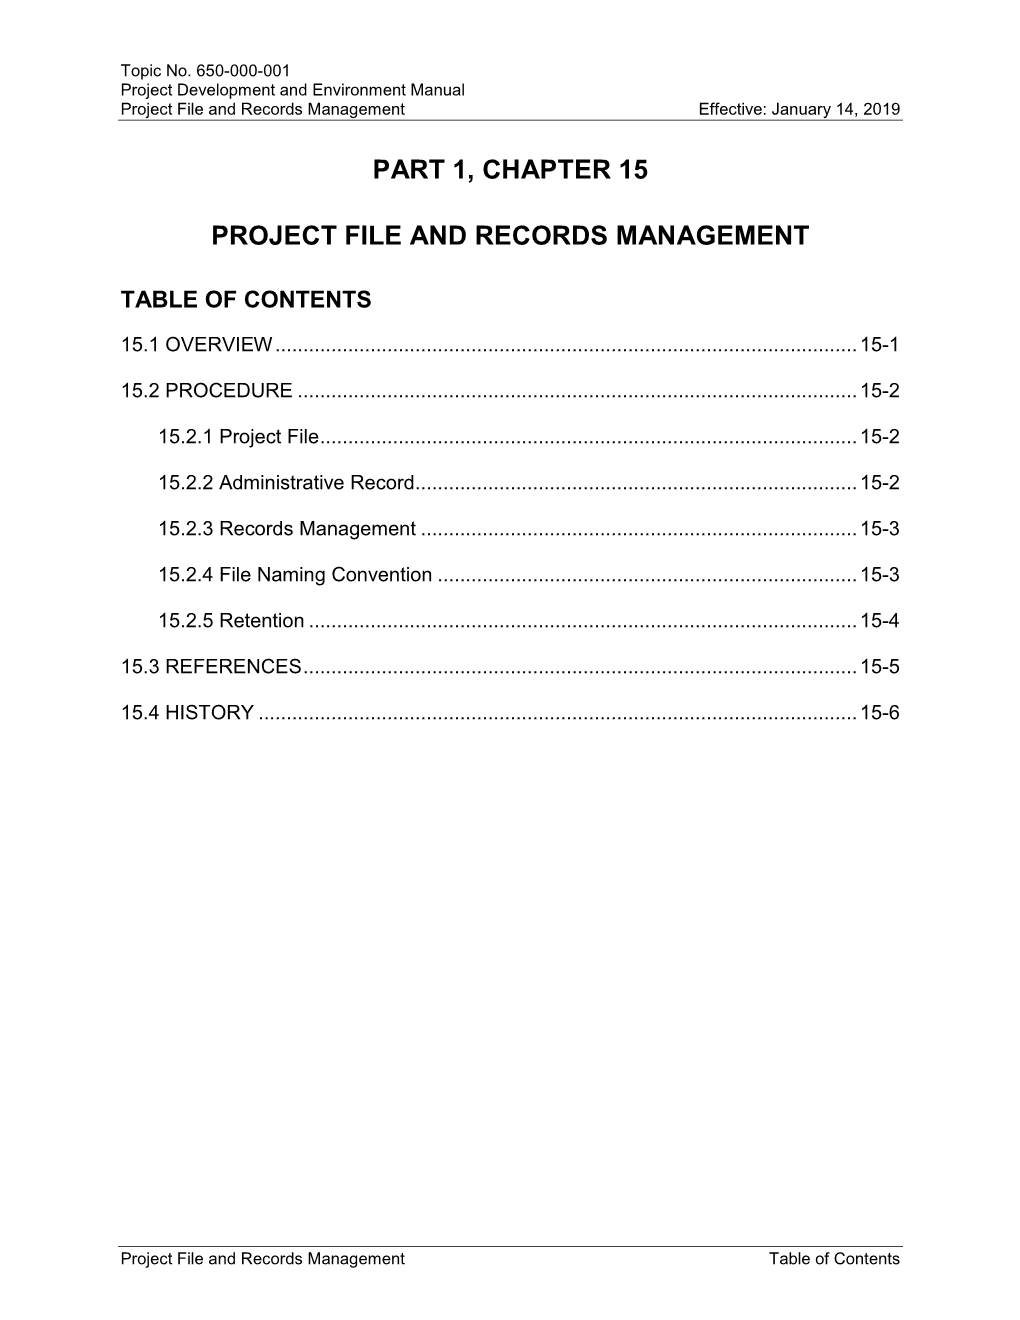 Part 1, Chapter 15 Project File and Records Management